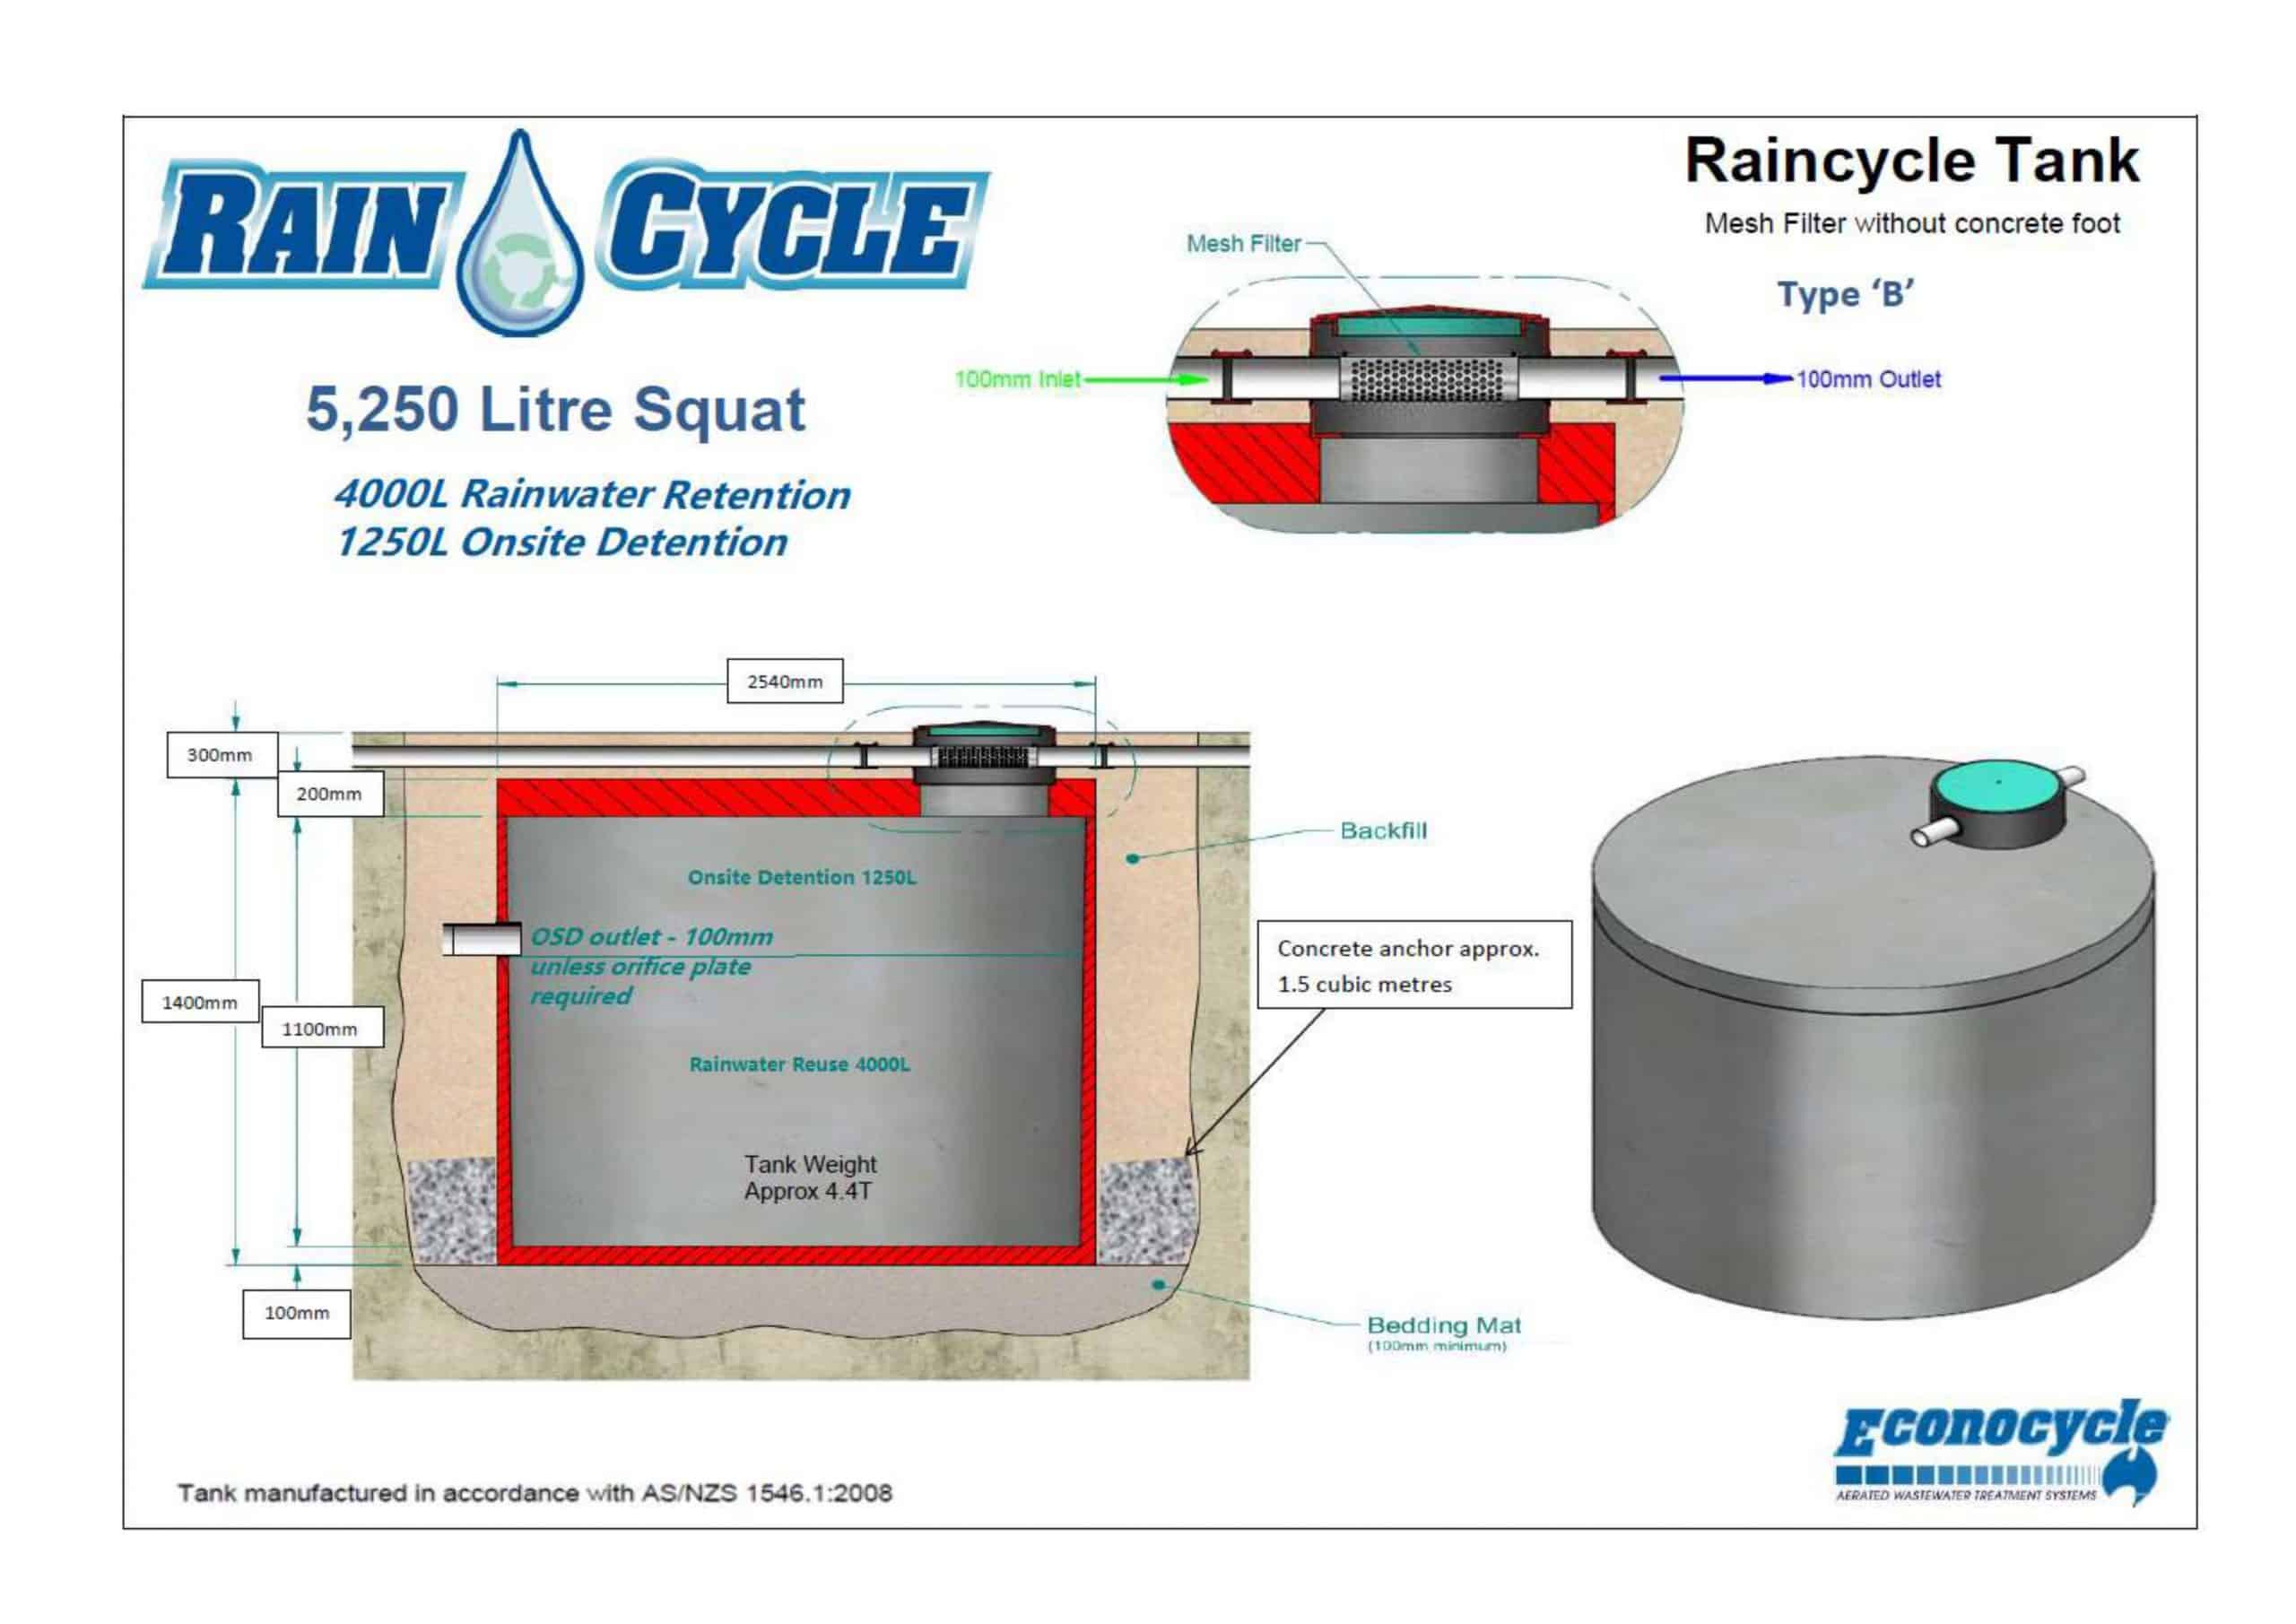 Ever Considered A Combined OSD And Rainwater In One Tank?